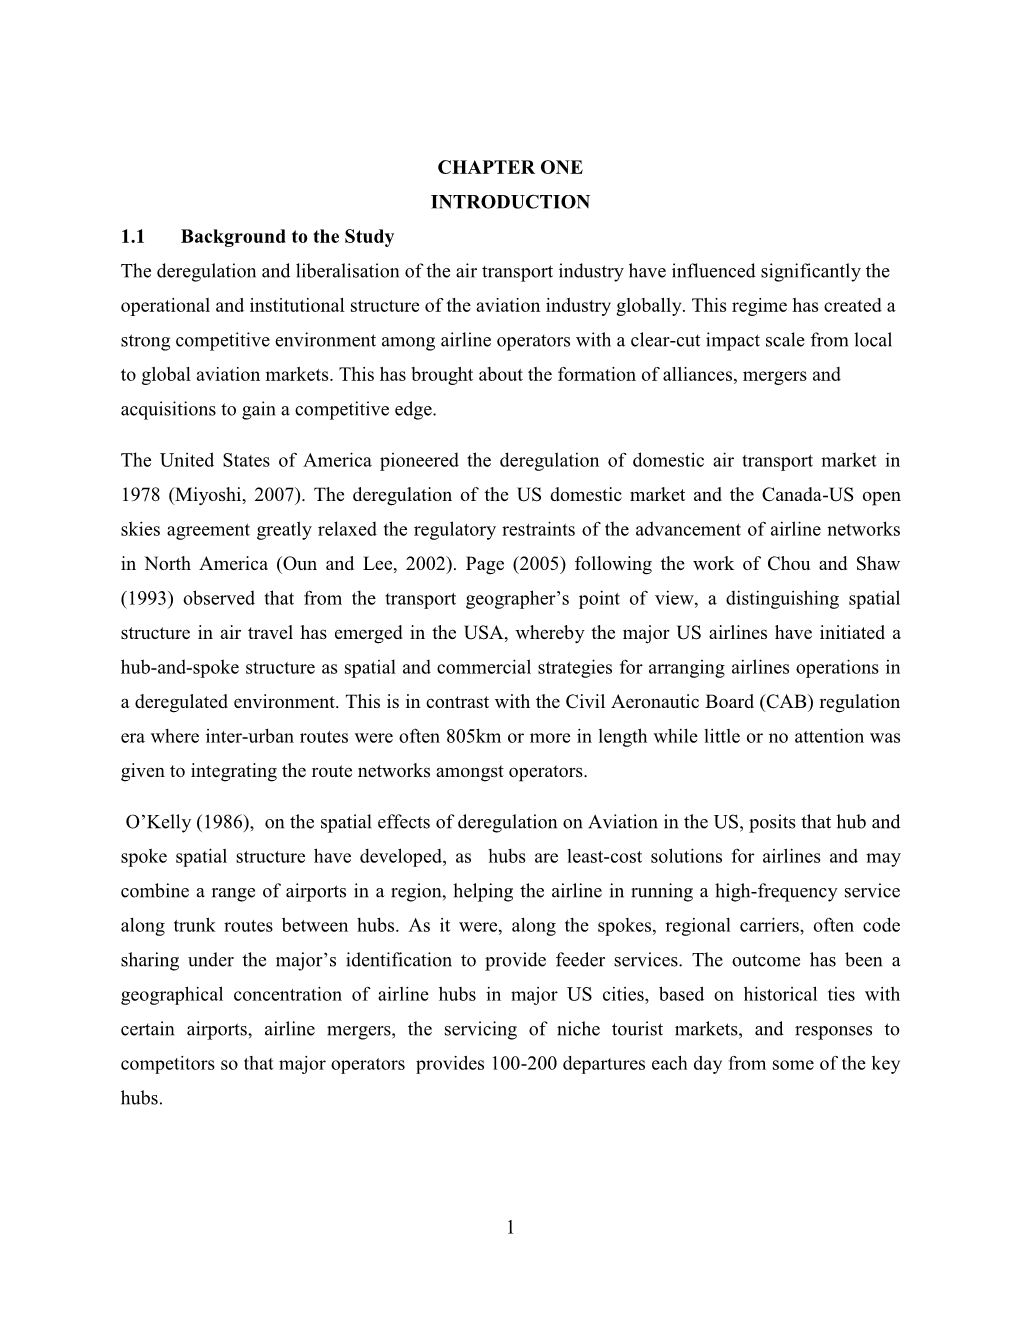 1 CHAPTER ONE INTRODUCTION 1.1 Background to the Study the Deregulation and Liberalisation of the Air Transport Industry Have In